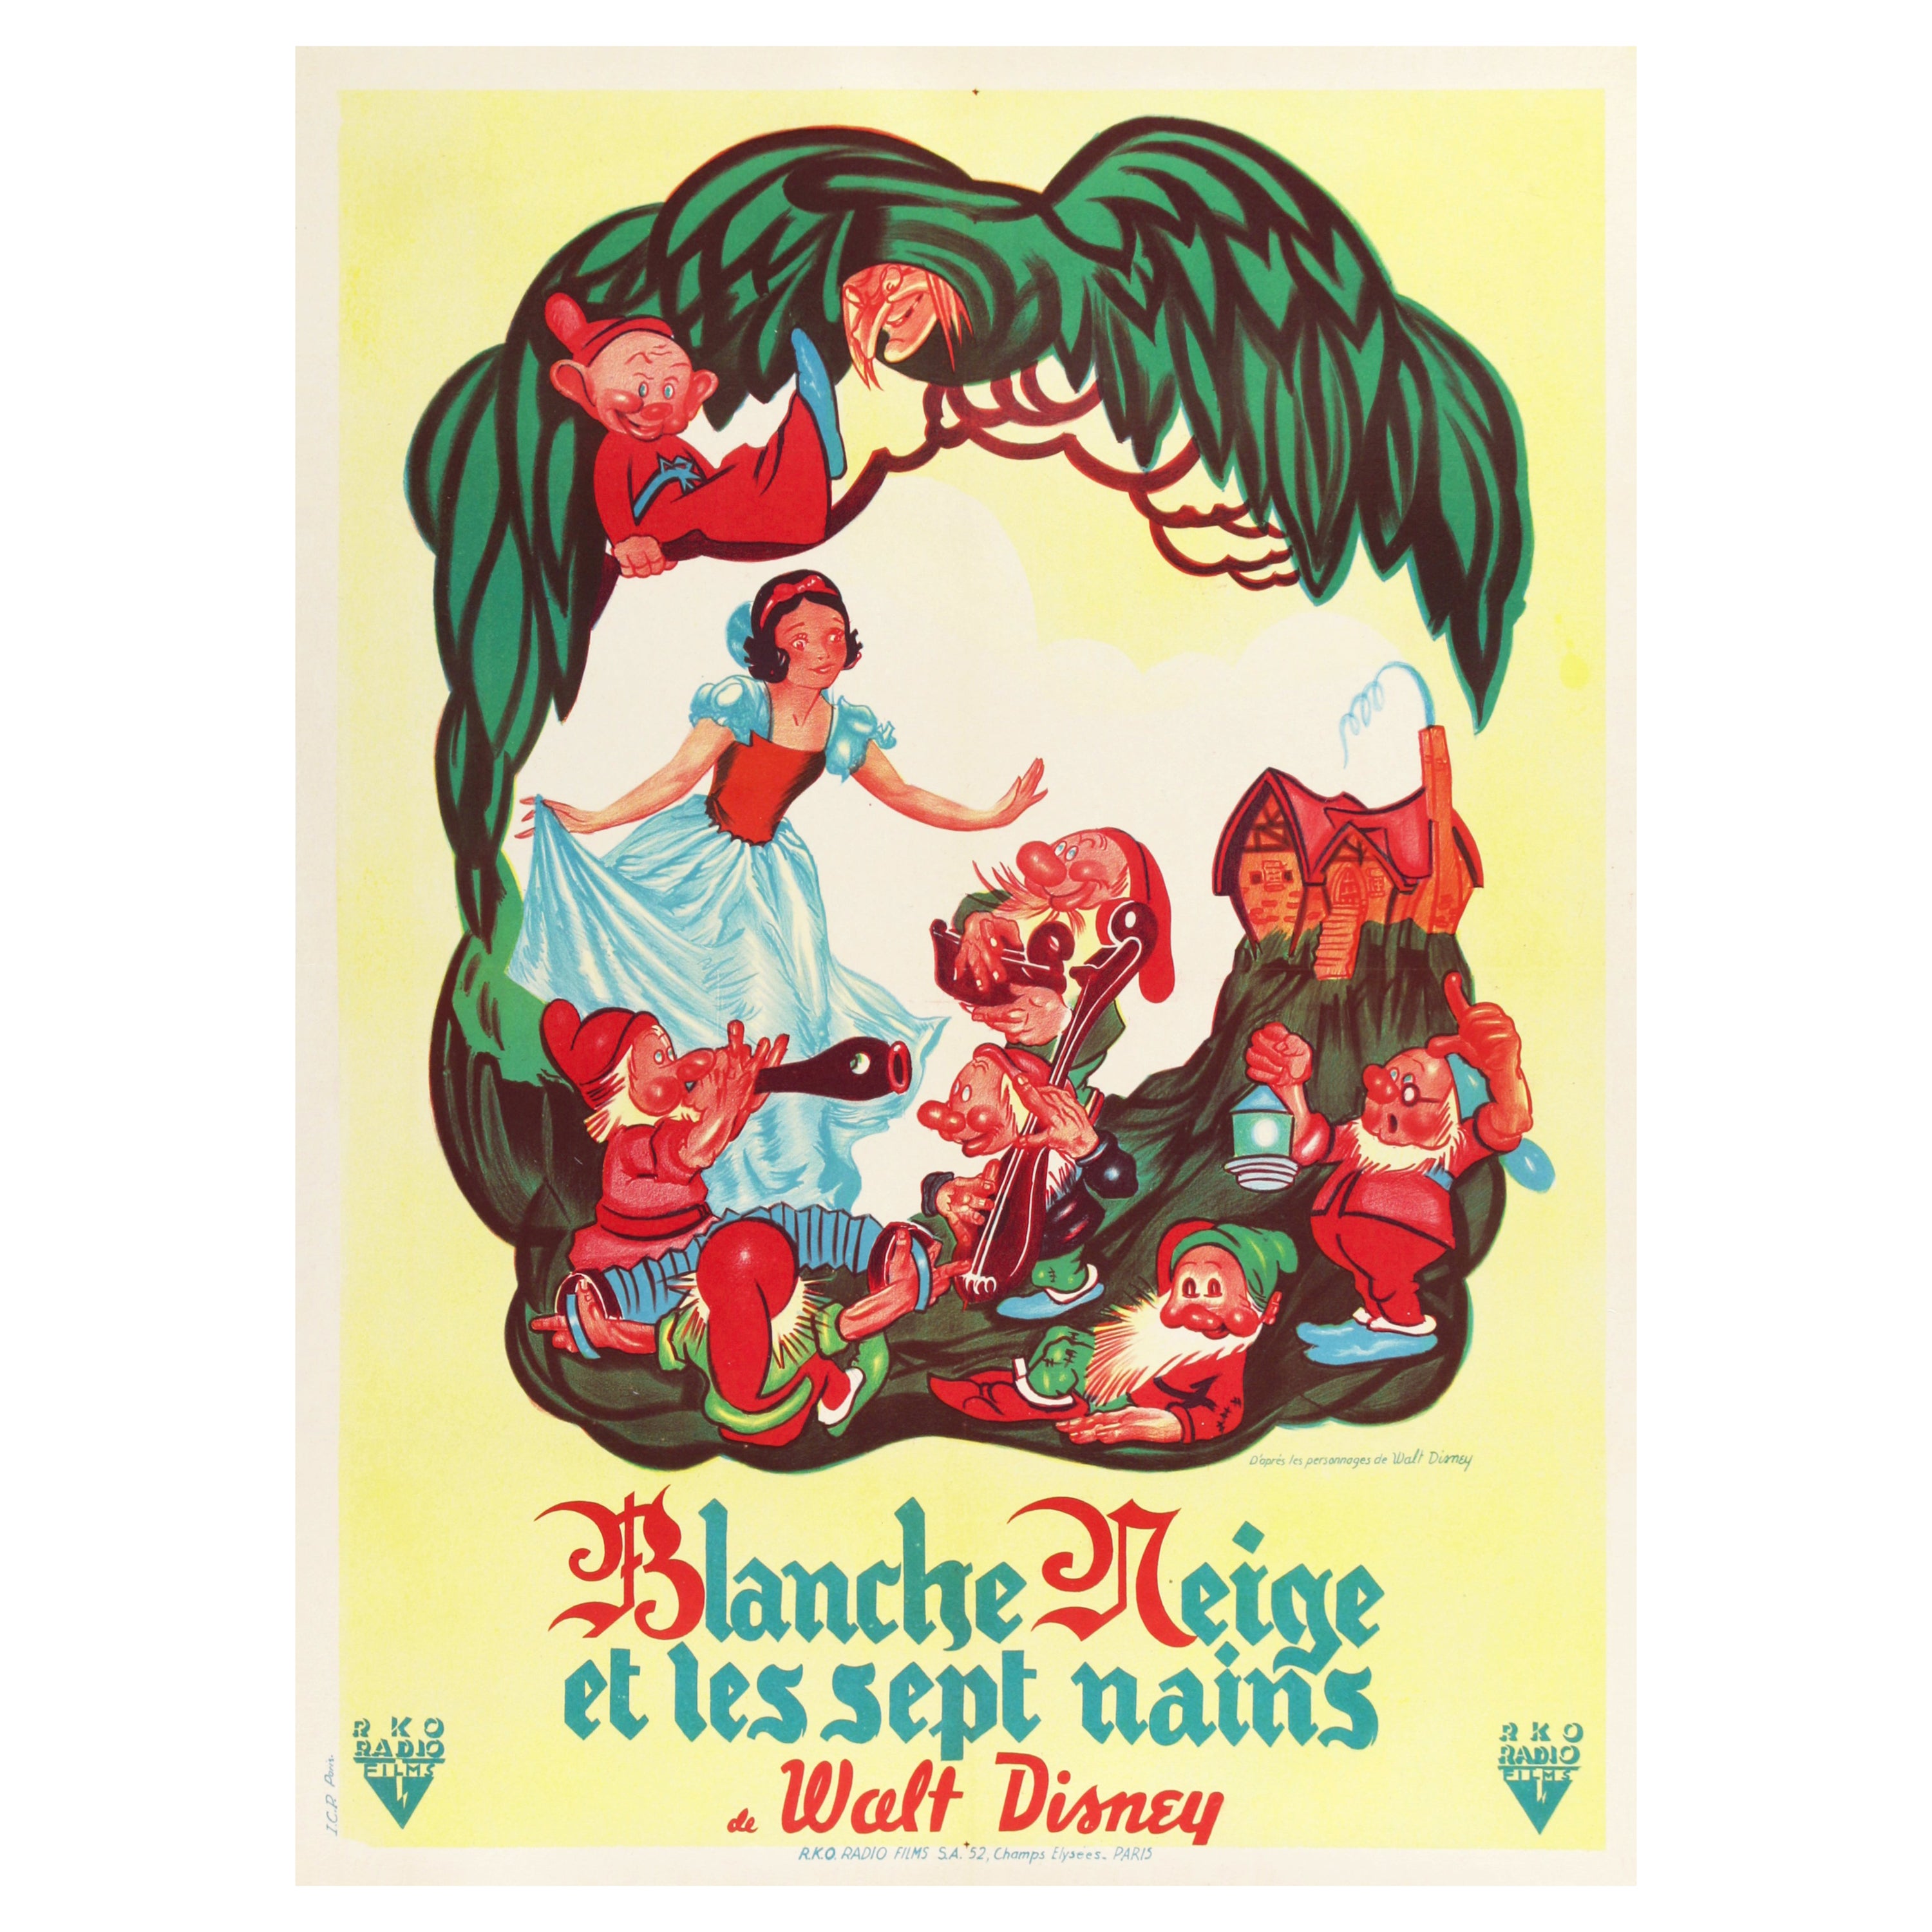 'Snow White and the Seven Dwarfs' Original Vintage Movie Poster, French, 1951 For Sale